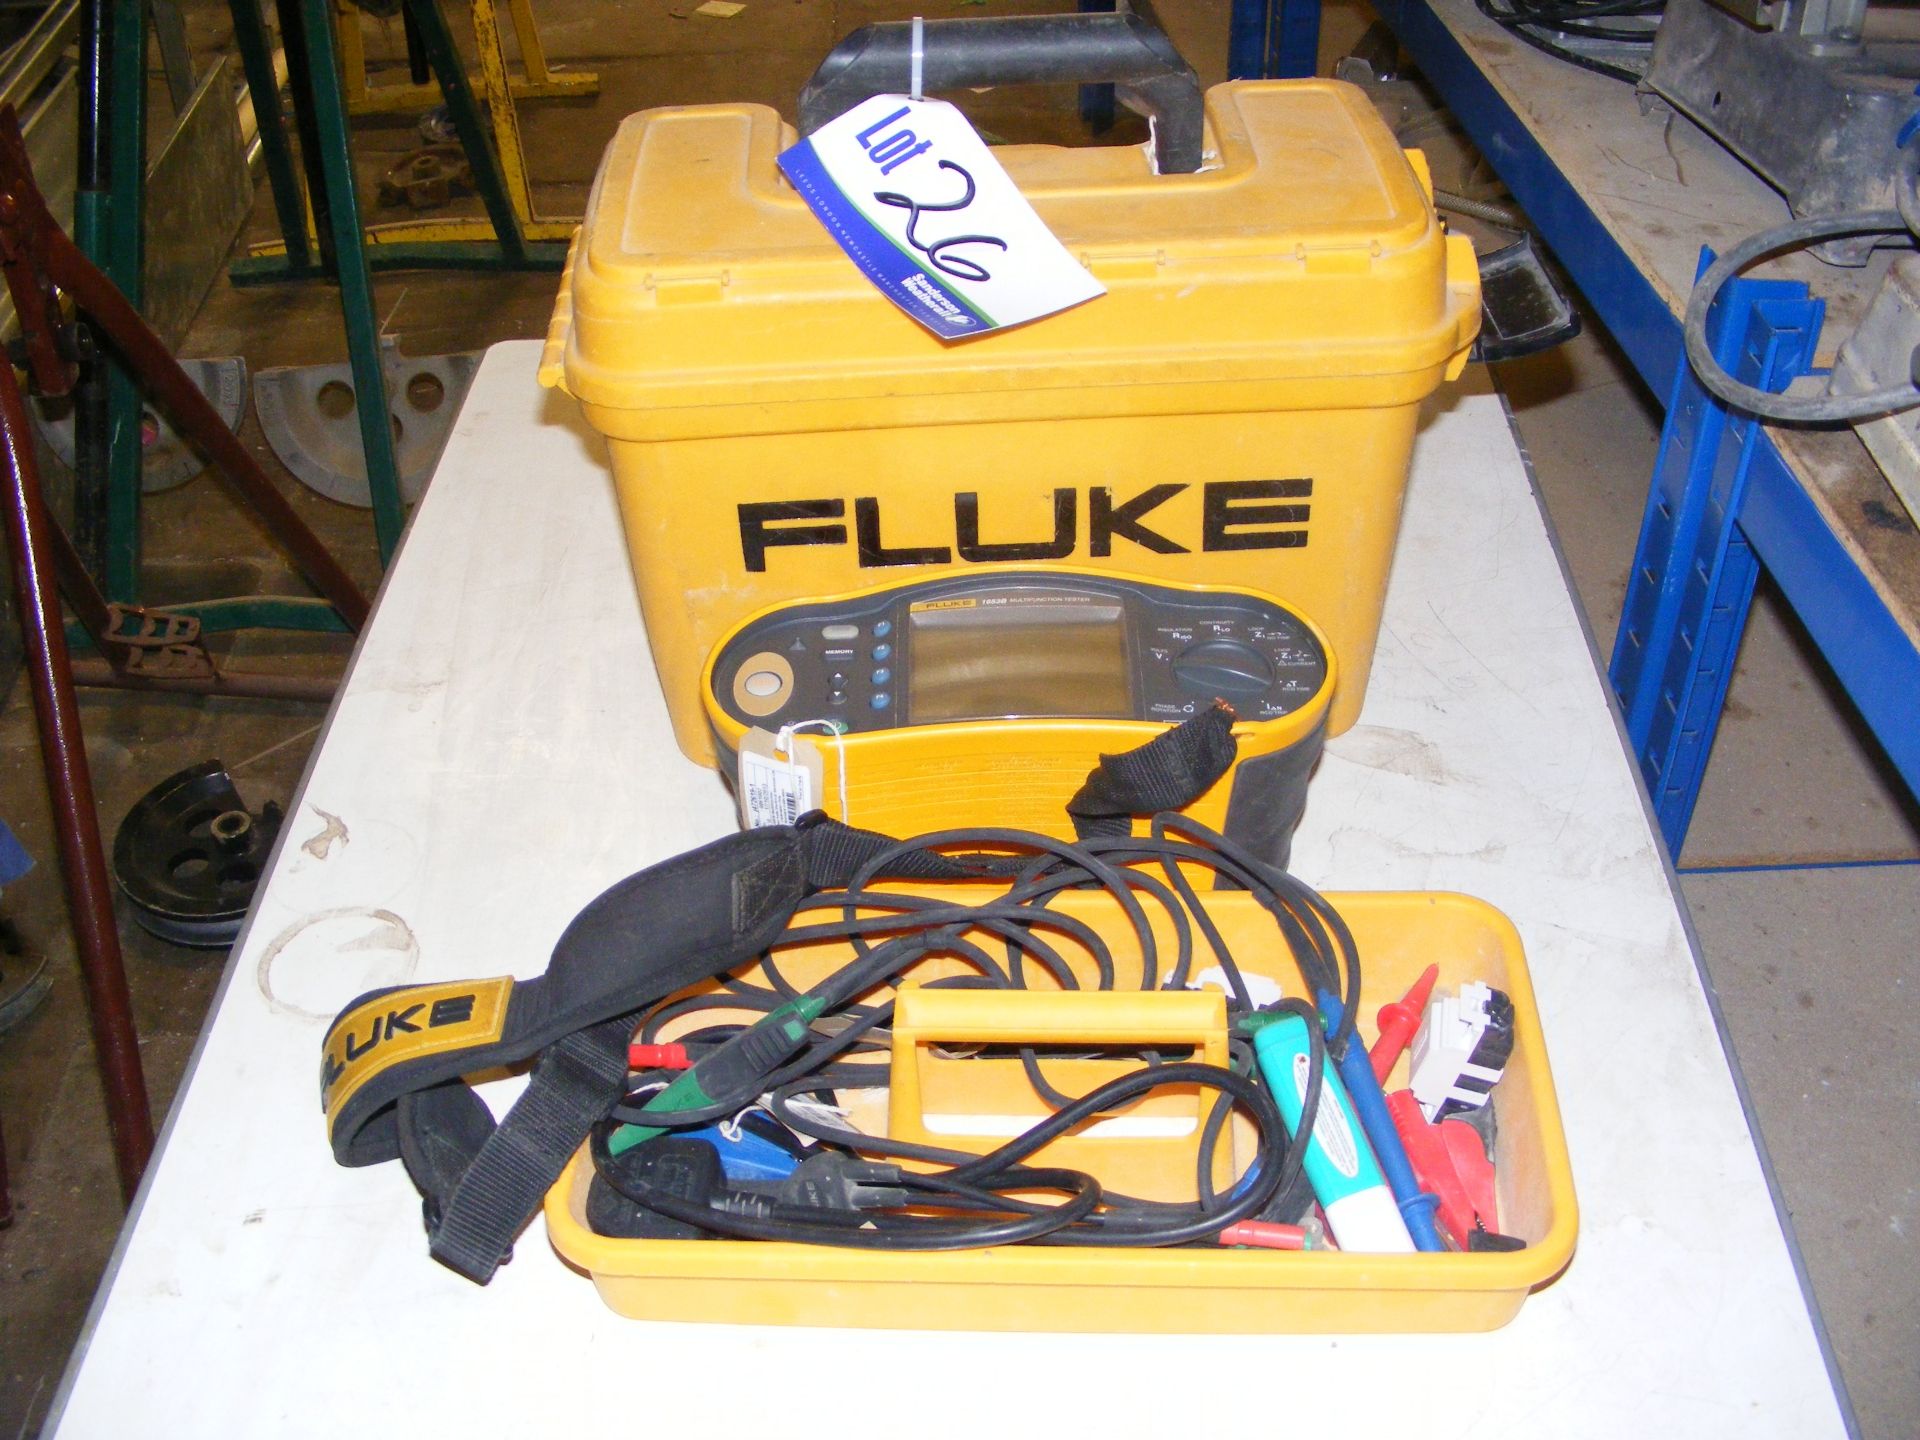 Fluke 1635B Multifunction Tester, with probes and carry case